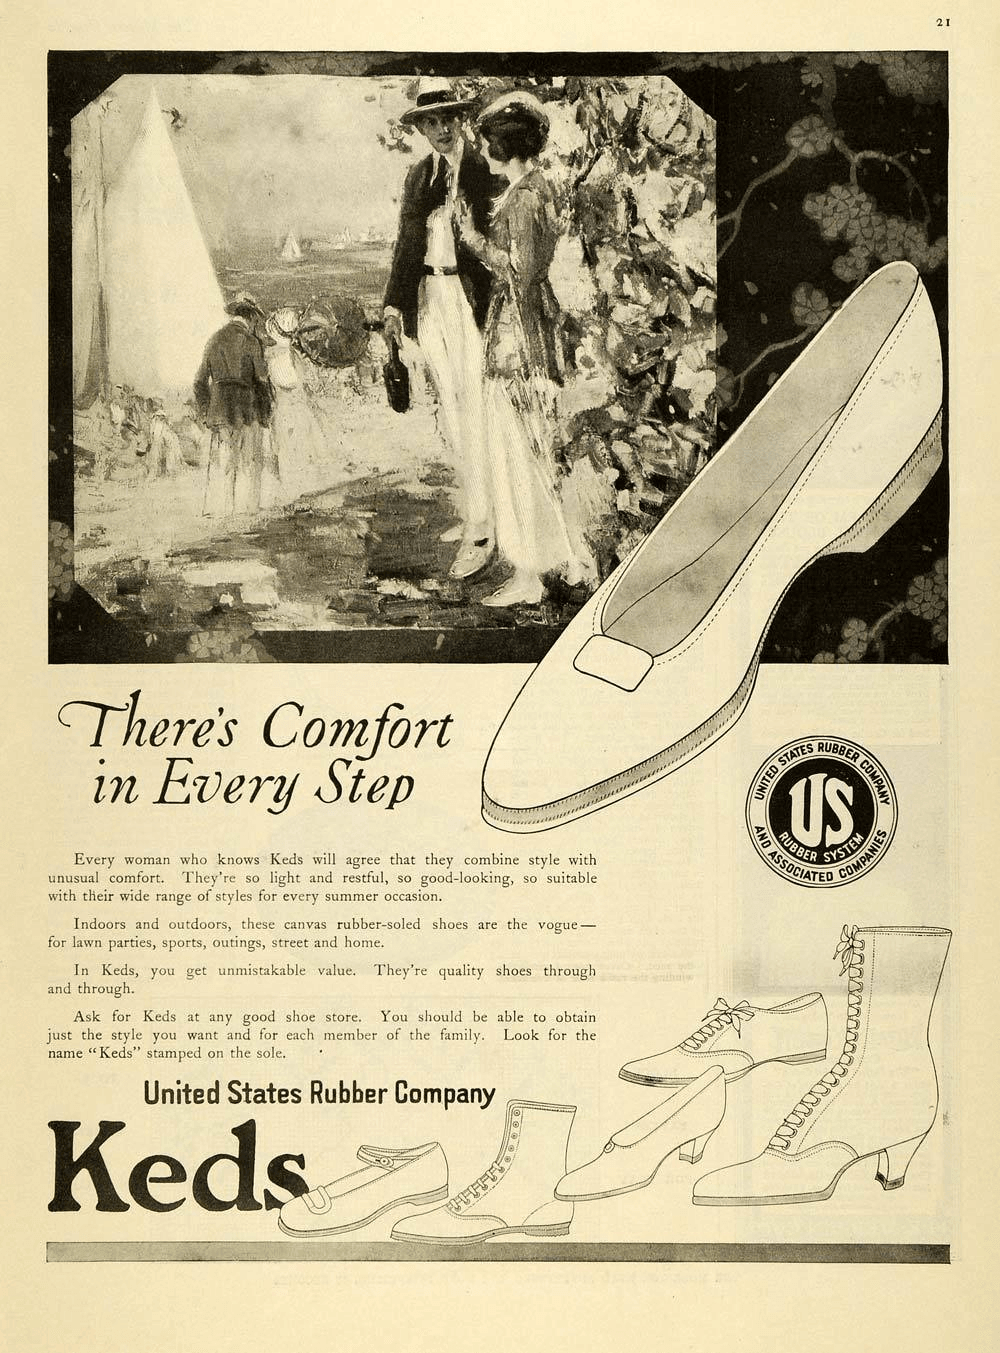 An old Keds marketing campaign before rebranding.